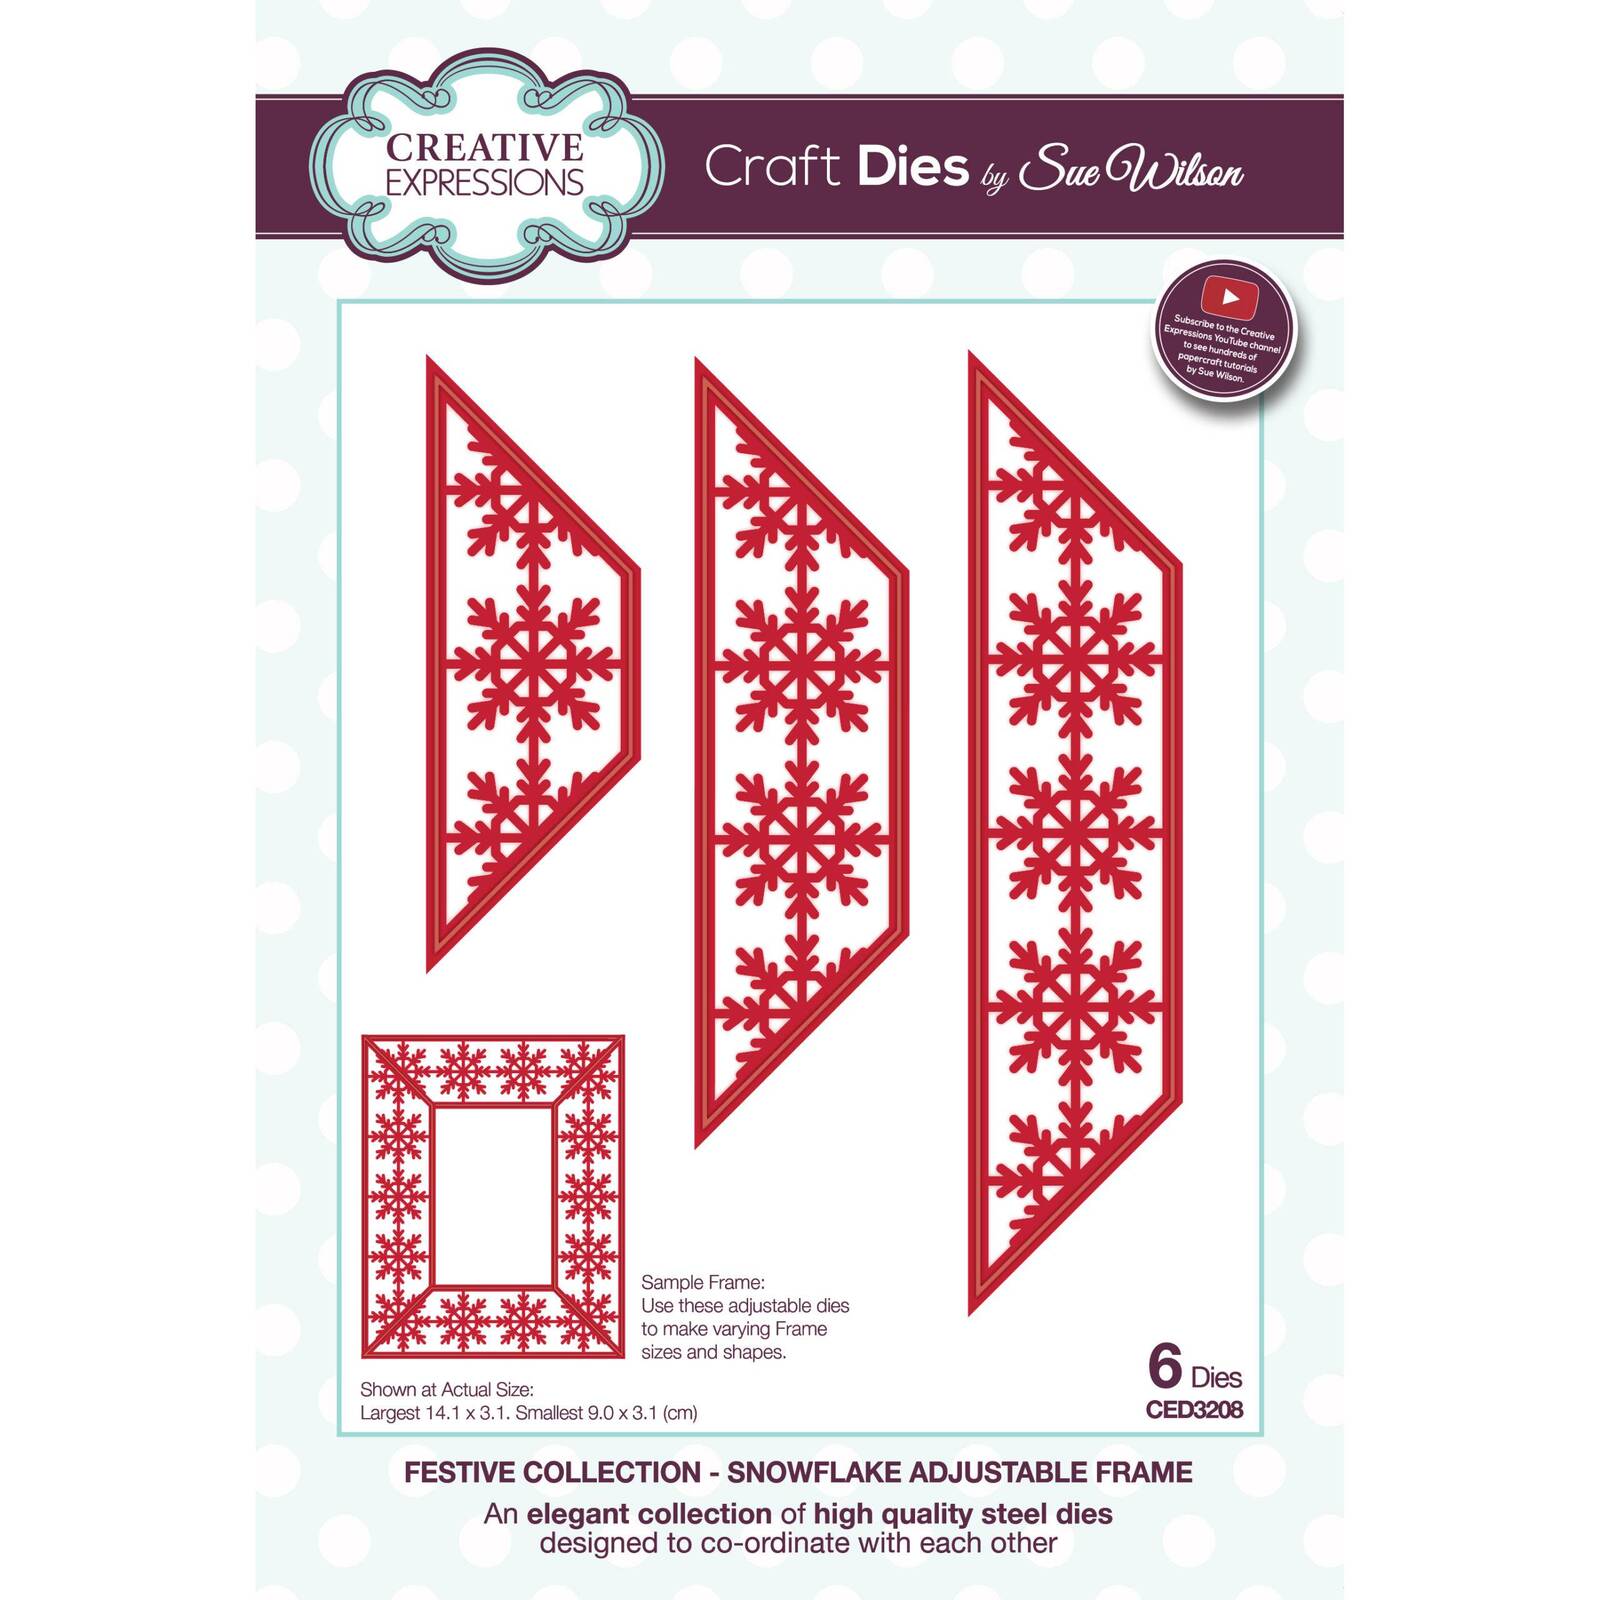 Sue Wilson Dies Festive Collection Snowflake Adjustable Frame CED3208